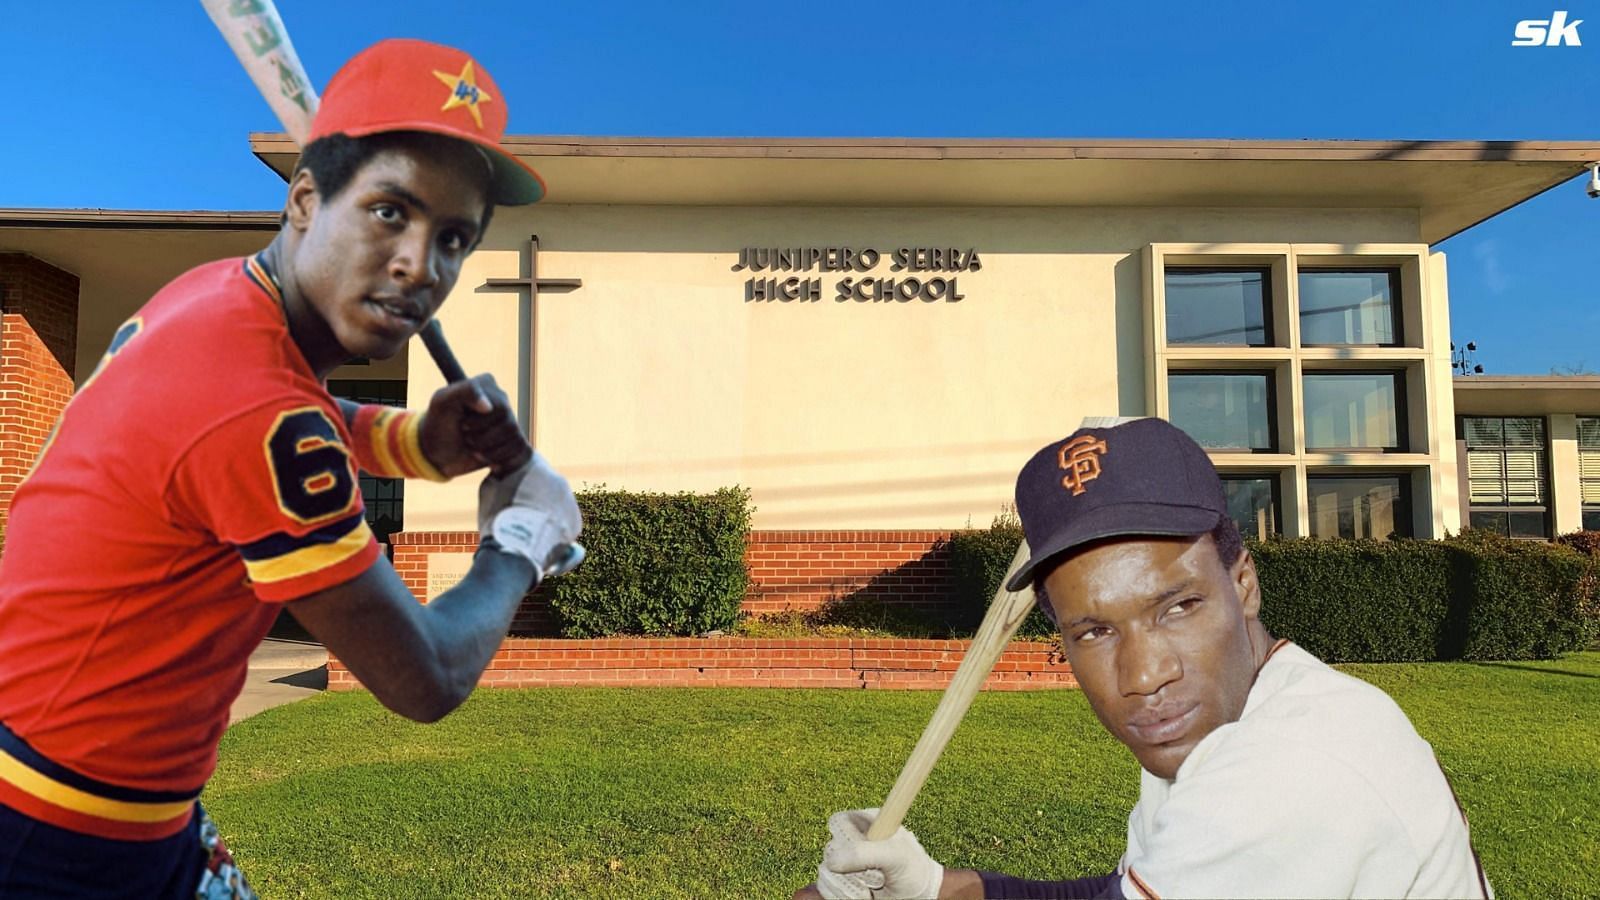 When Barry Bonds got away with assaulting his schoolmate for his father Bobby Bonds